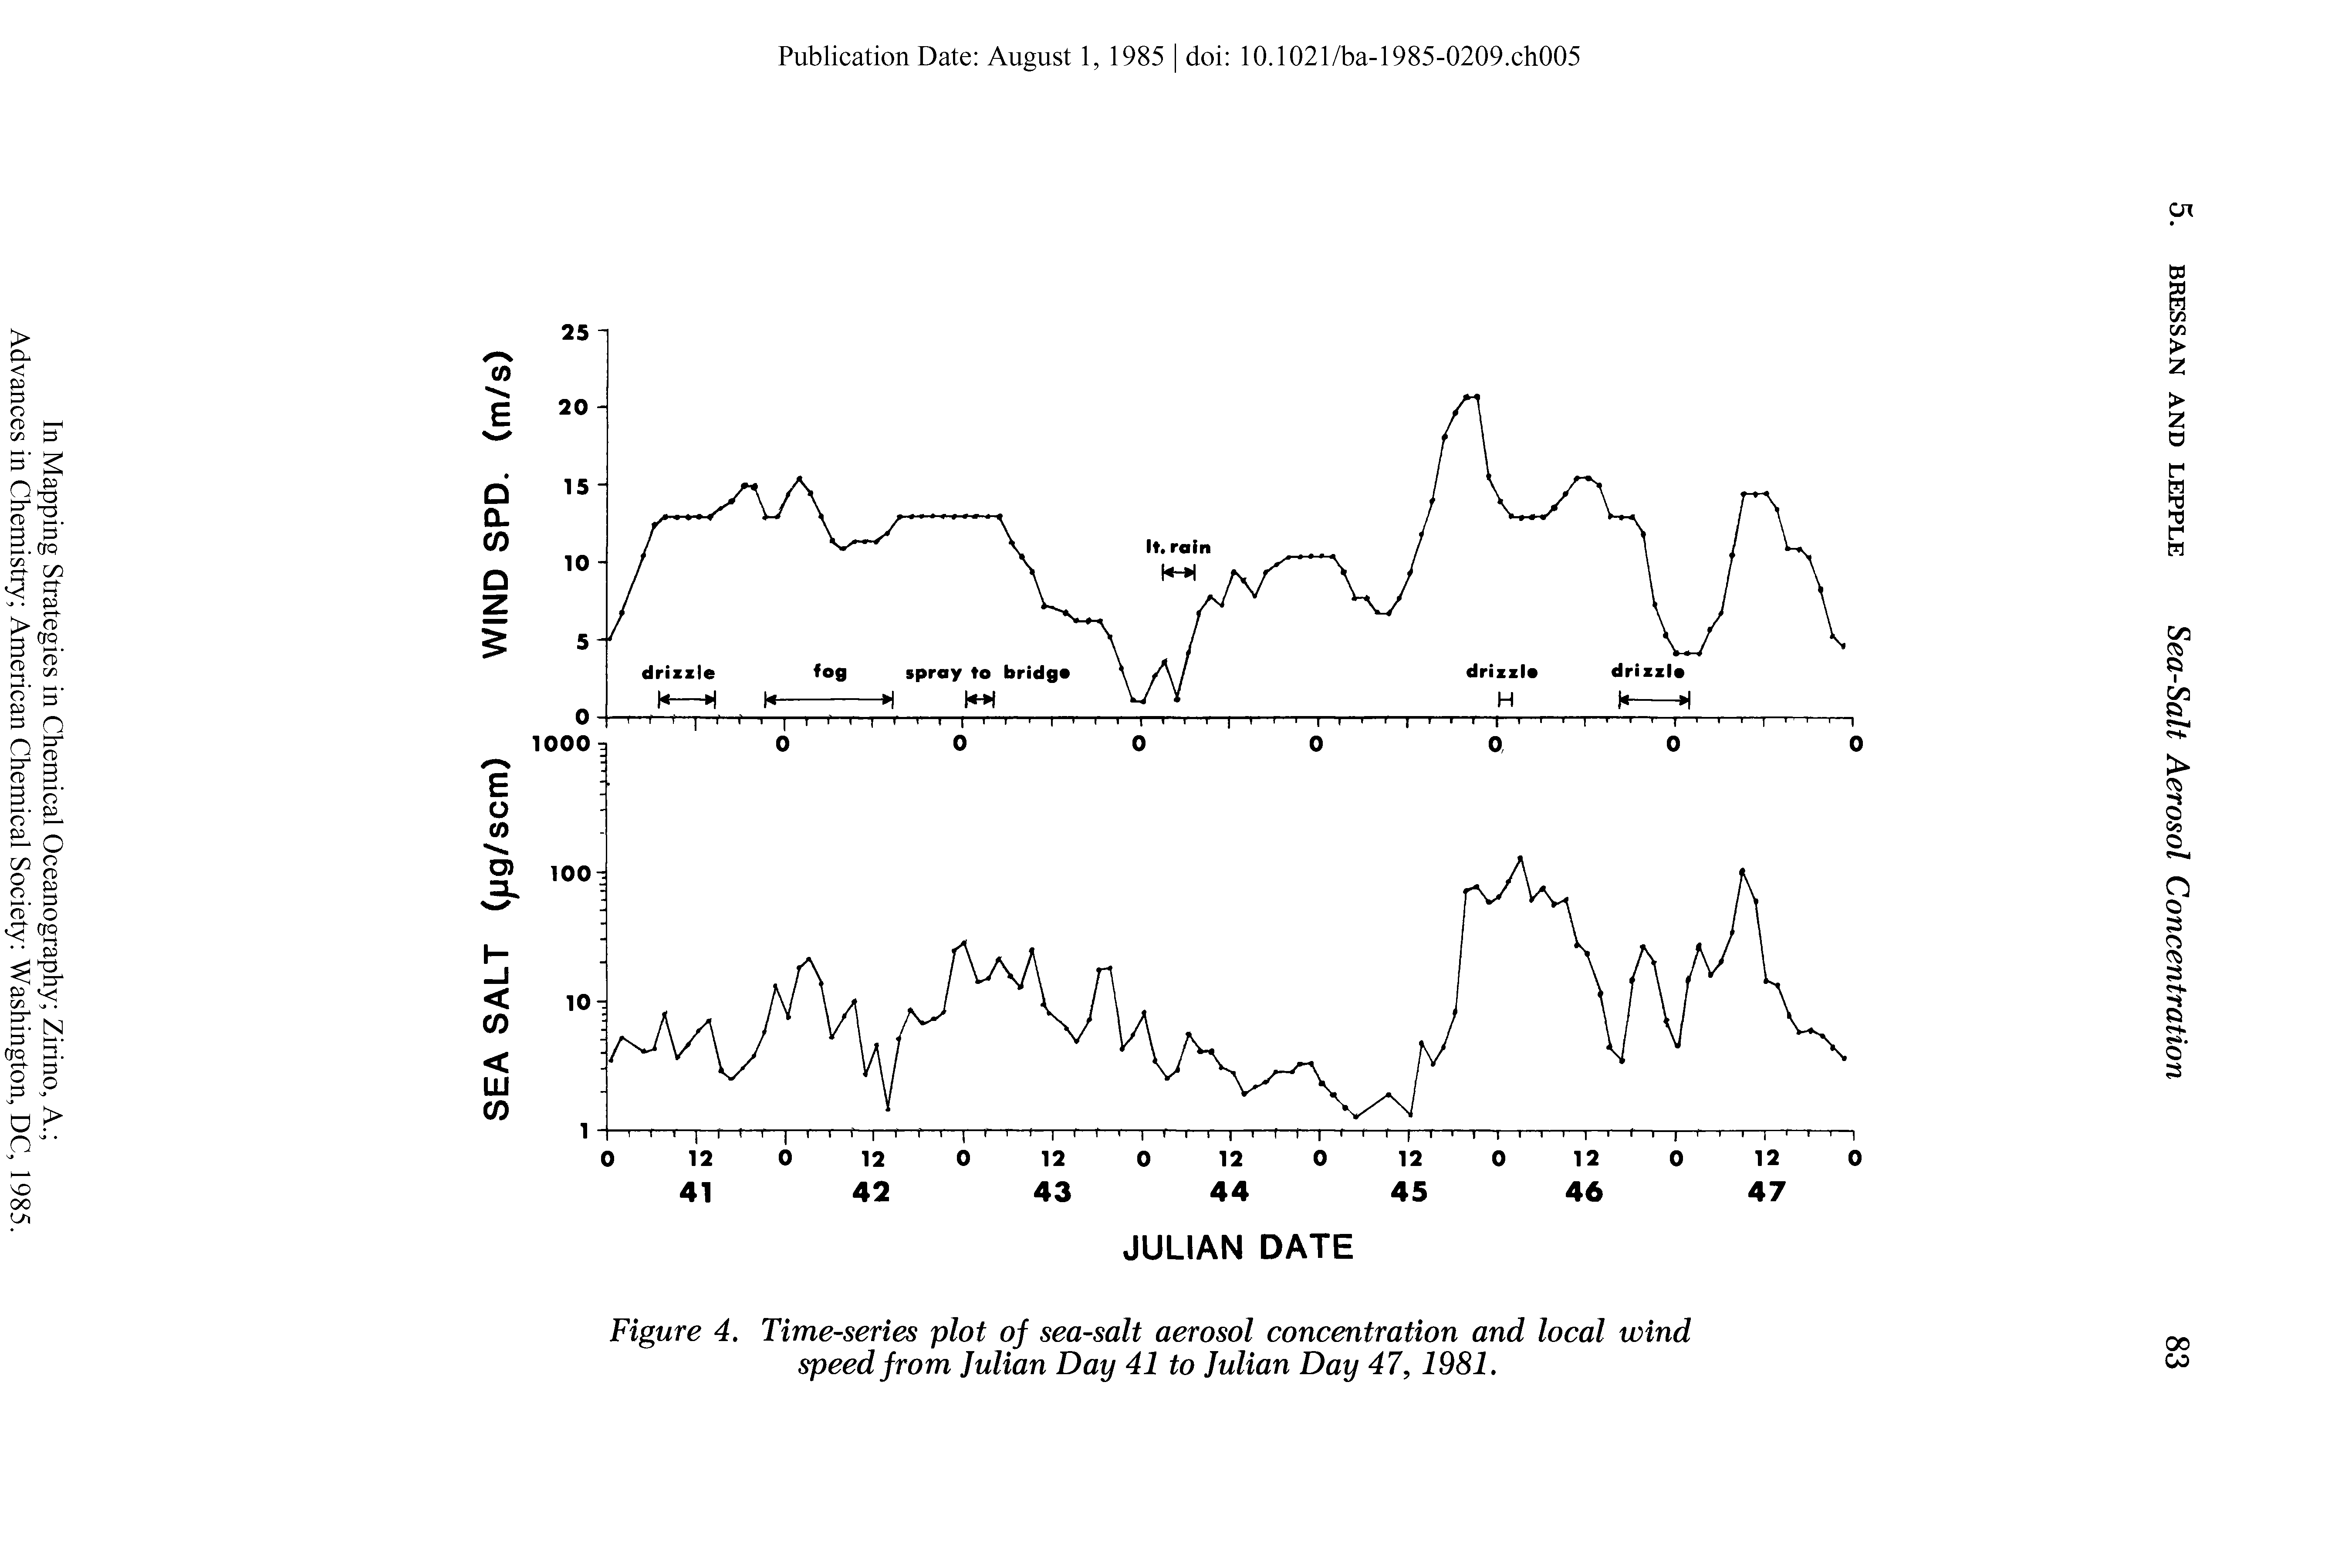 Figure 4. Time-series plot of sea-salt aerosol concentration and local wind speed from Julian Day 41 to Julian Day 47, 1981.